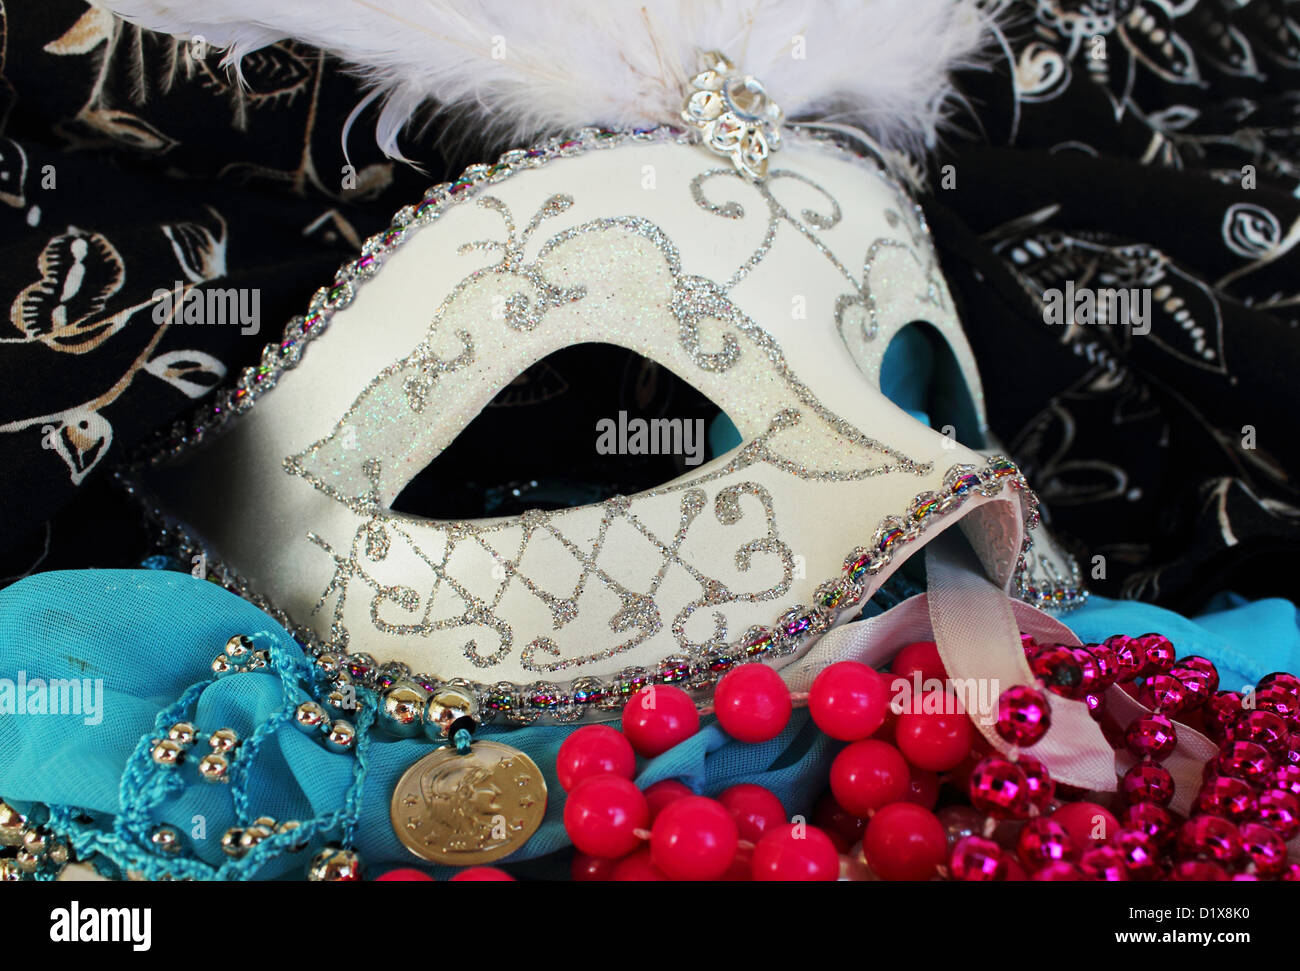 A masquerade ball mask adorned with glitter and rhinestons surrounded by party beads, bangles and fabrics Stock Photo